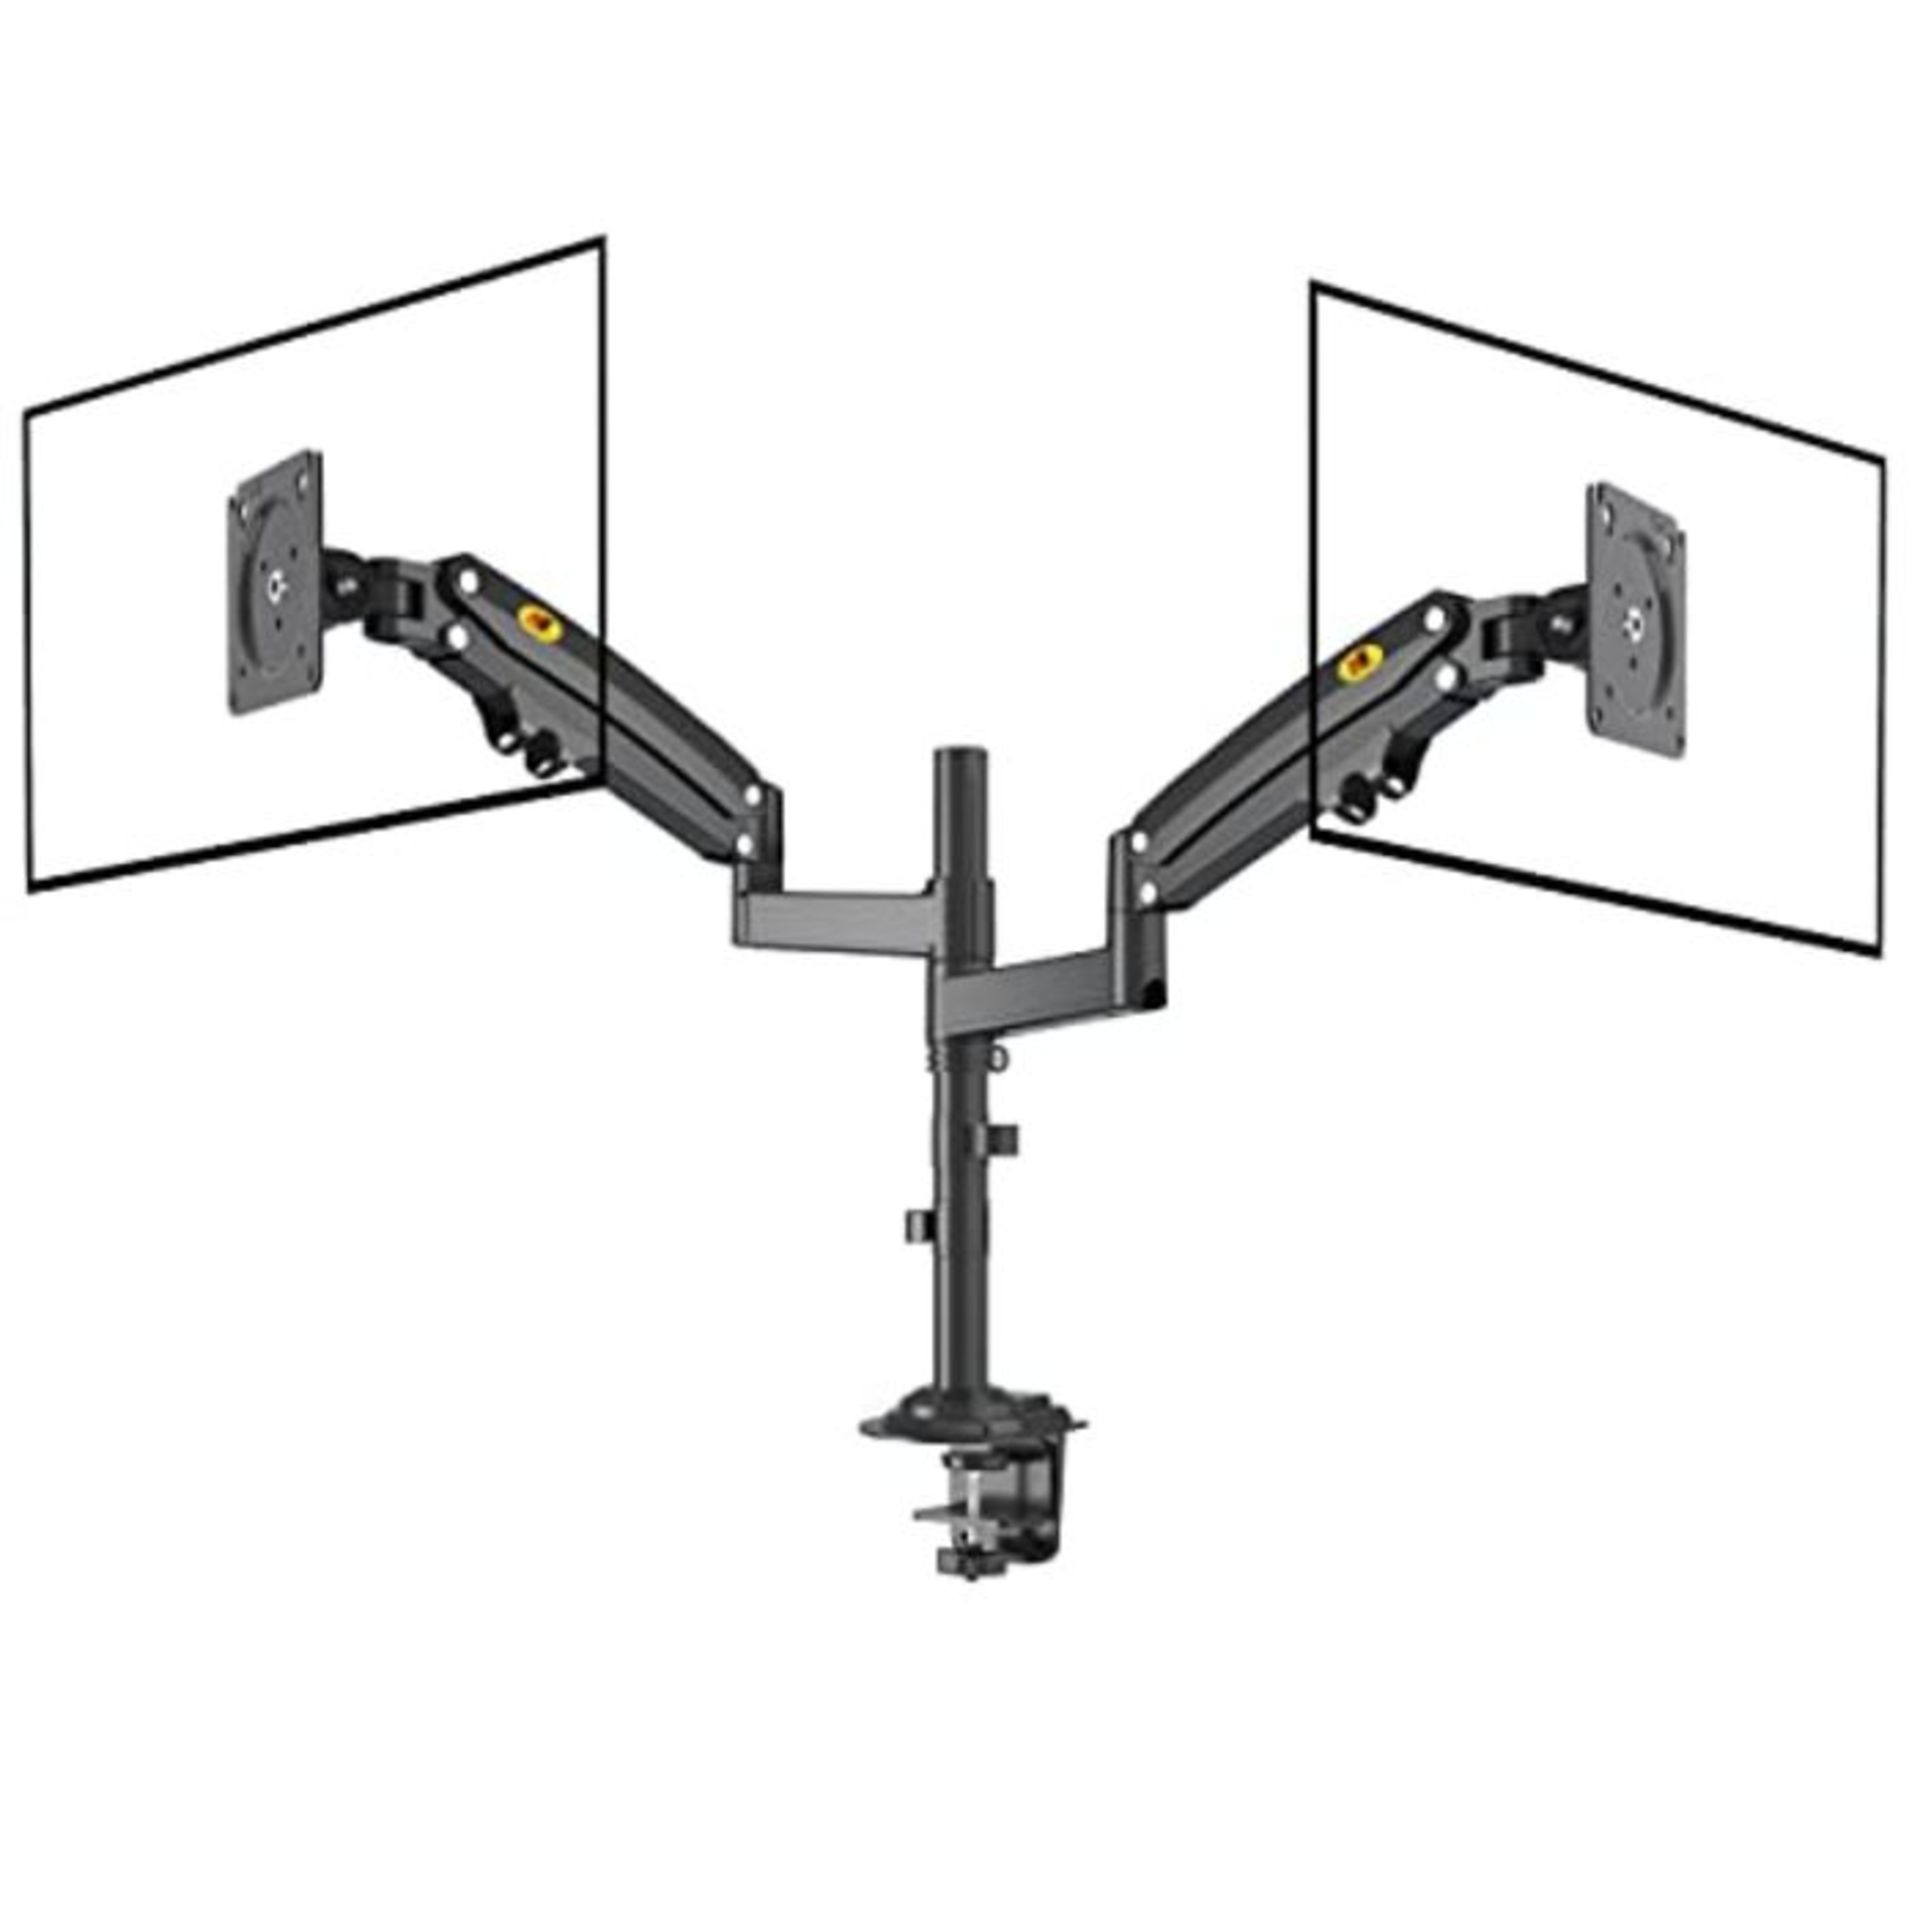 Ergosolid Heavy Duty Swivel Desk Mount with Gas Spring for Two 22-32 Inch LED LCD Moni